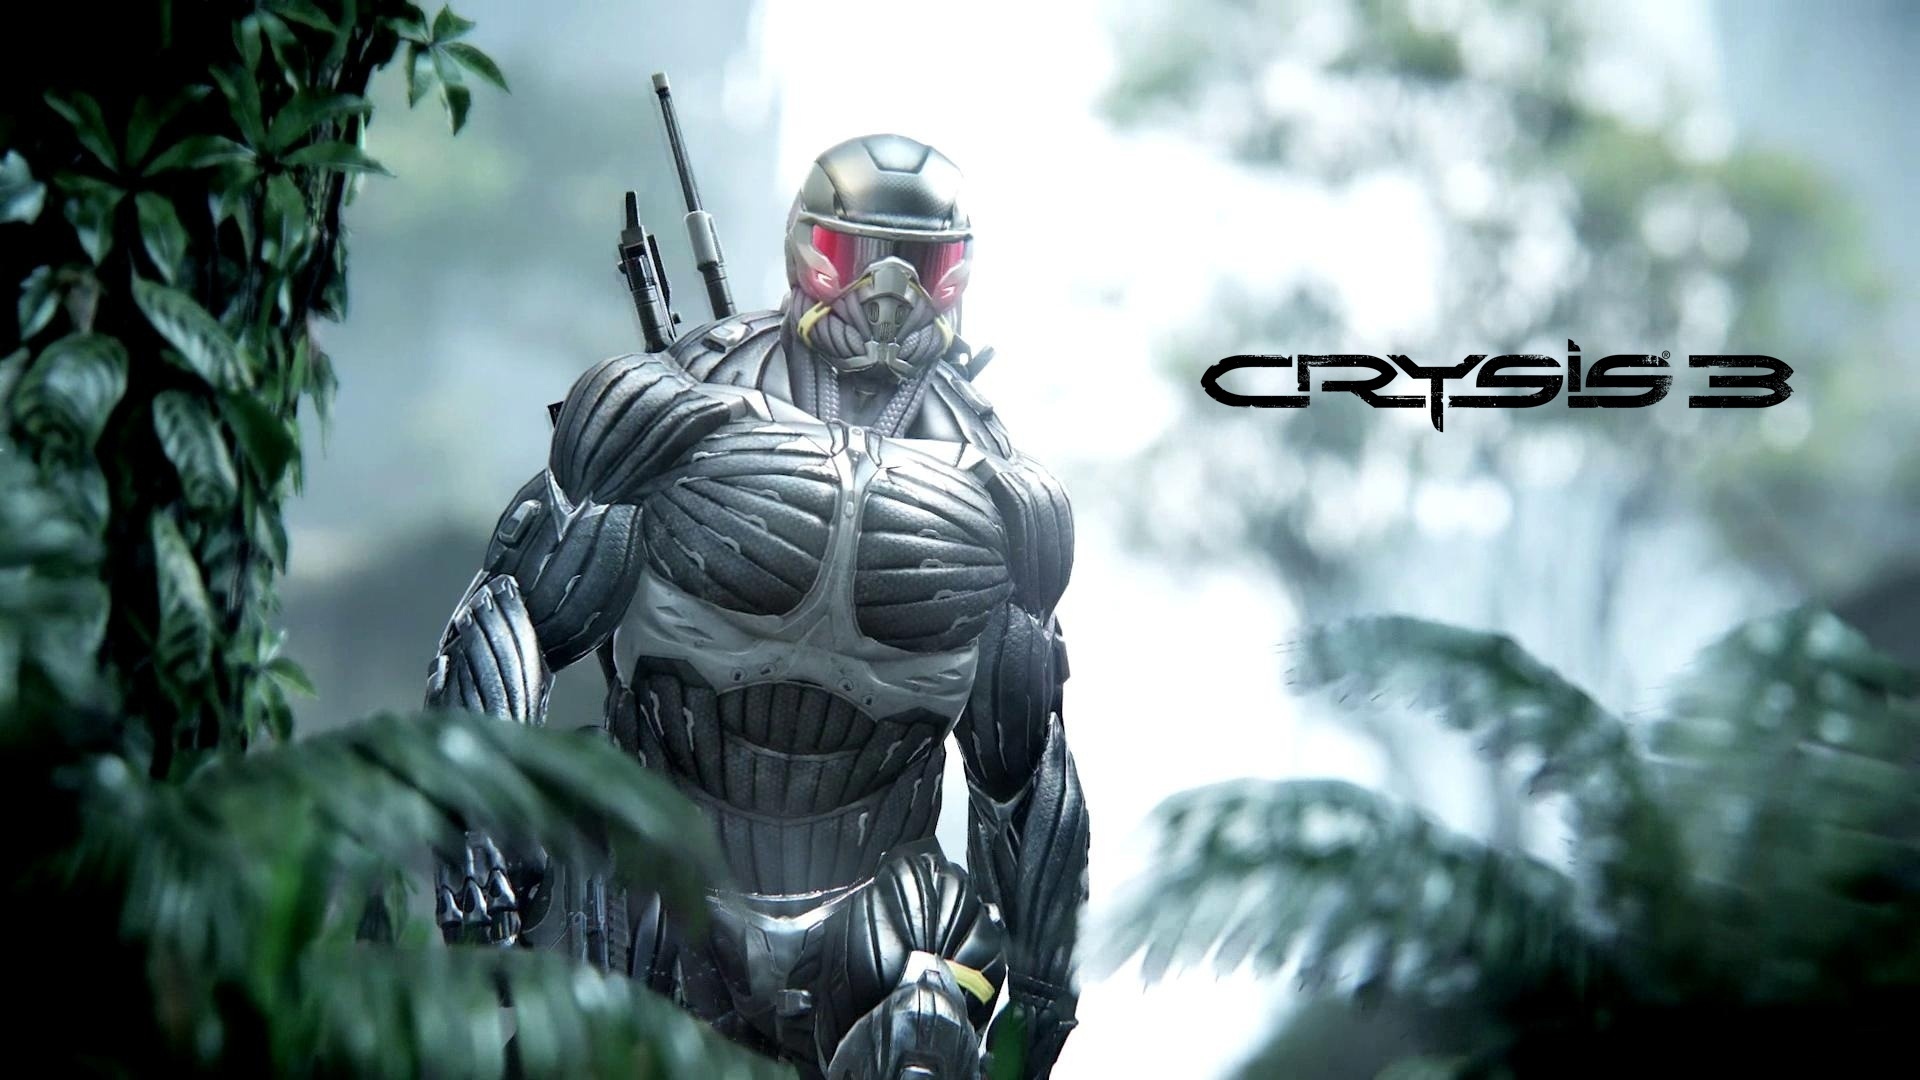 Download Crysis wallpapers for mobile phone free Crysis HD pictures